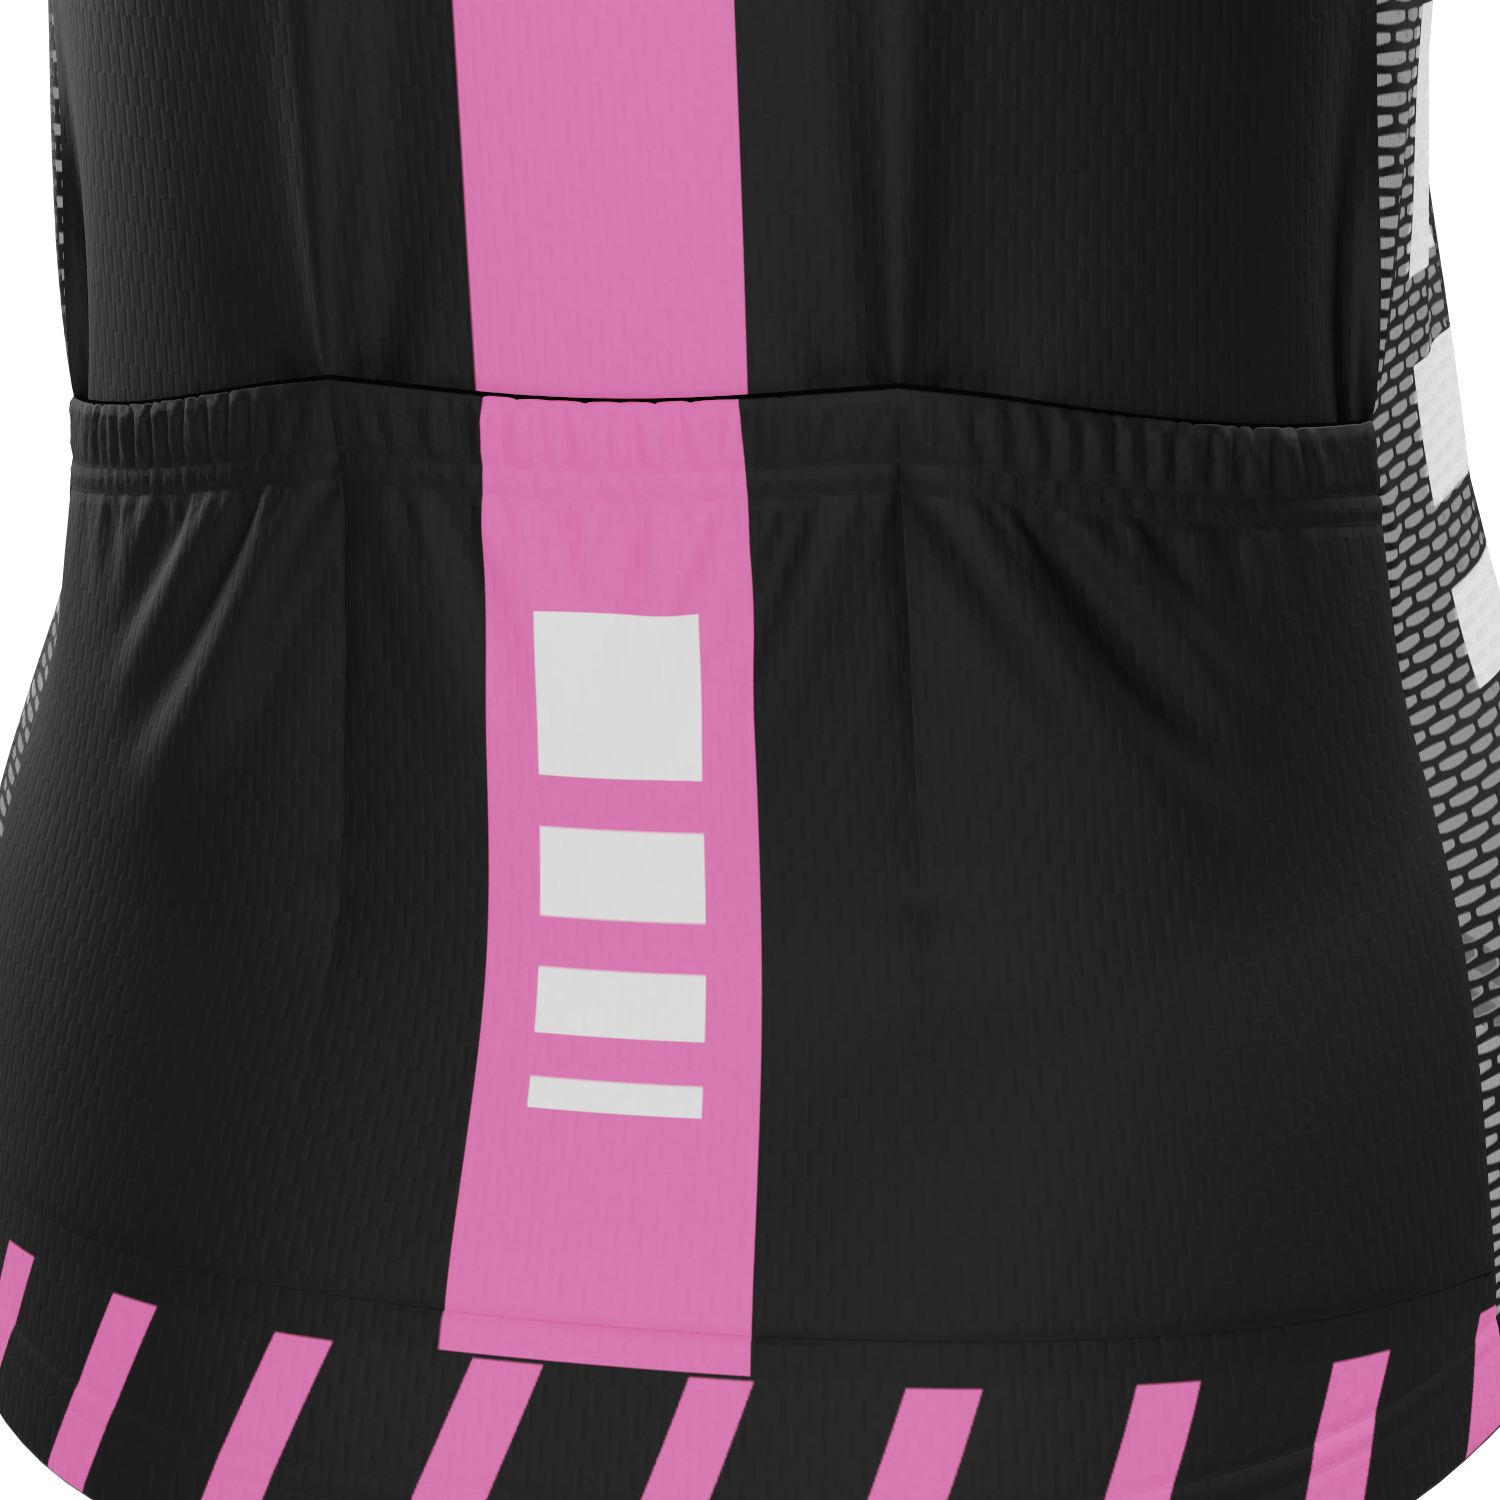 Women's Pink Top Short Sleeves Cycling Jersey [clearance]